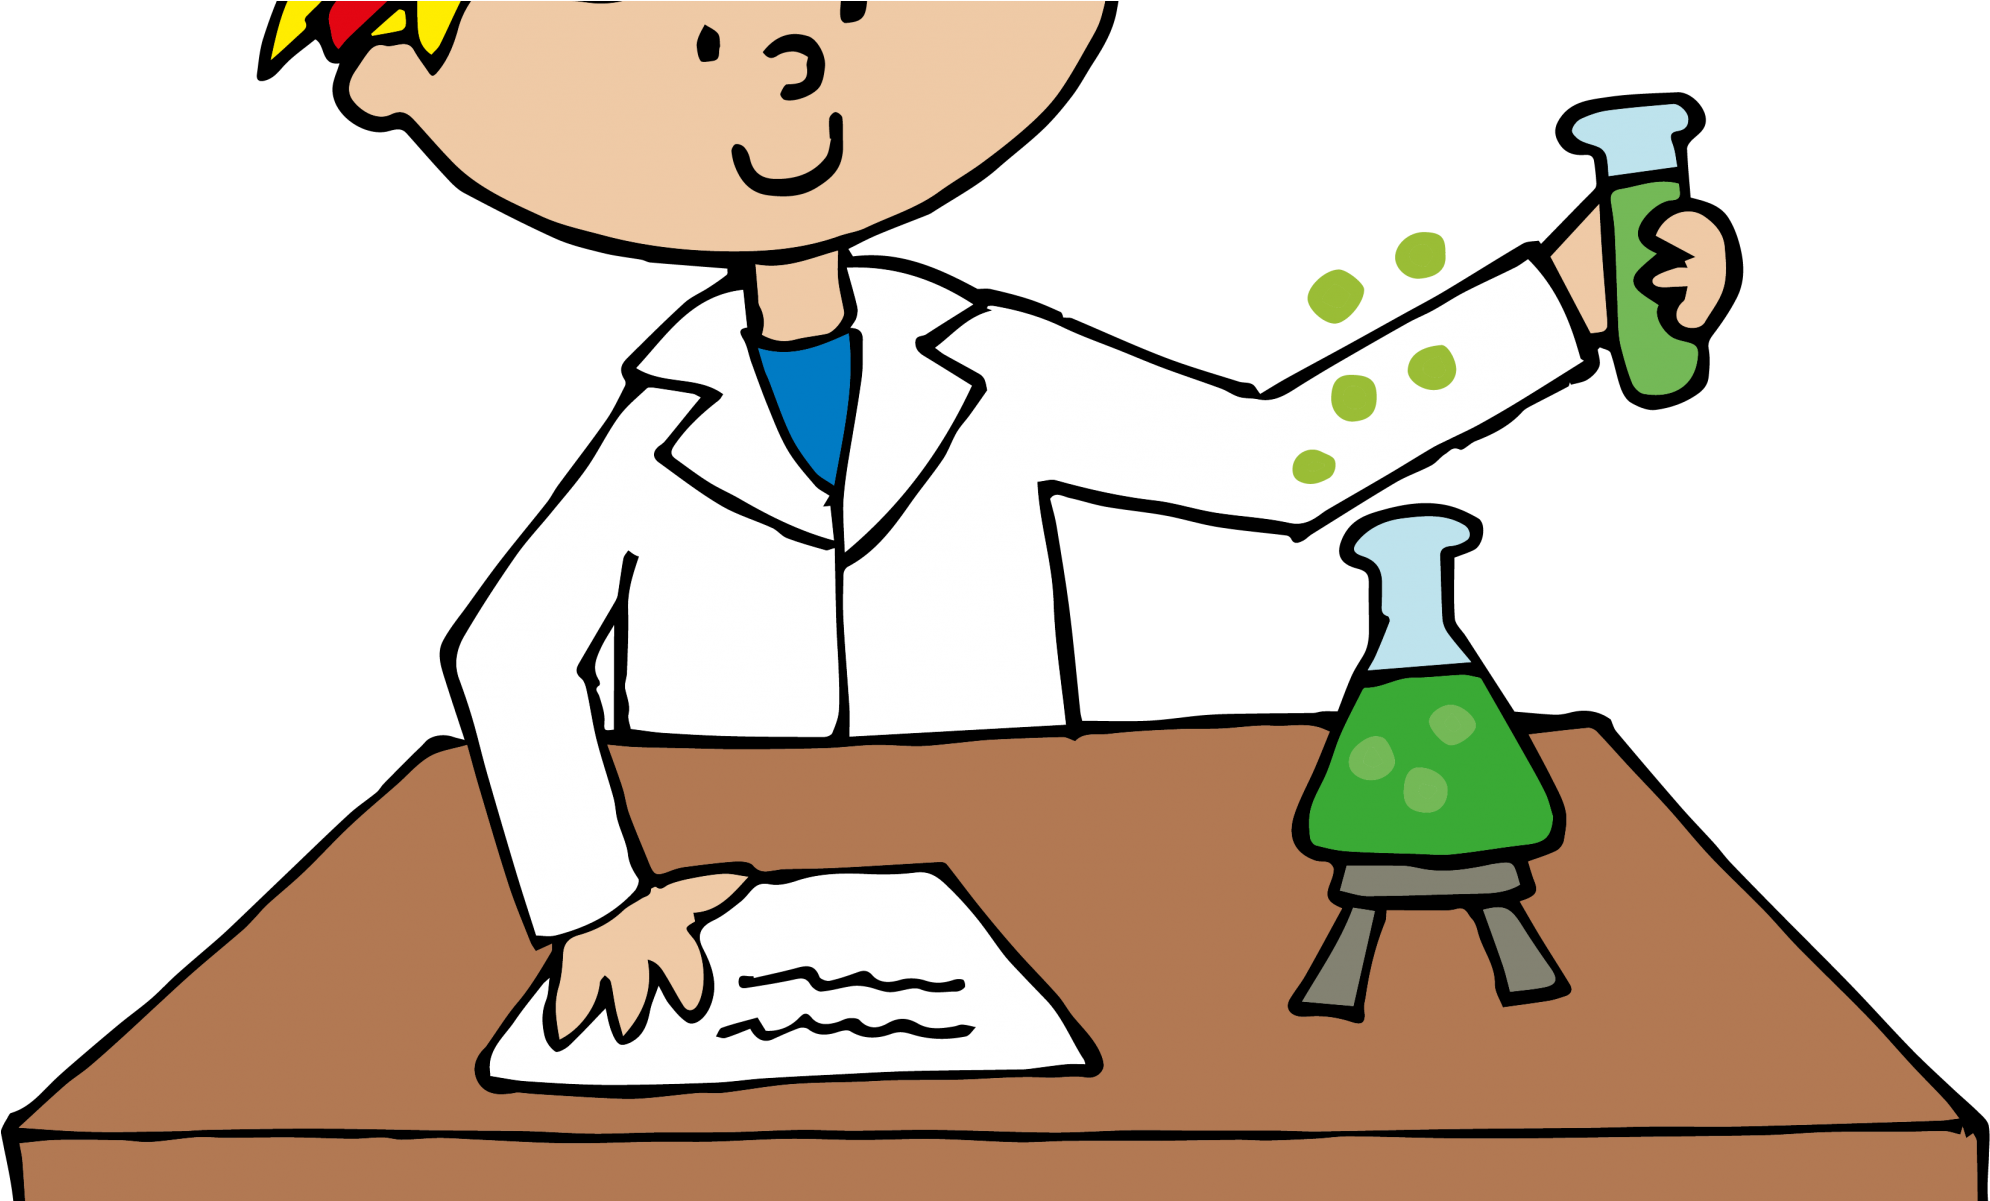 Download and share clipart about Science Lab Safety Clipart Clipart Free Re...